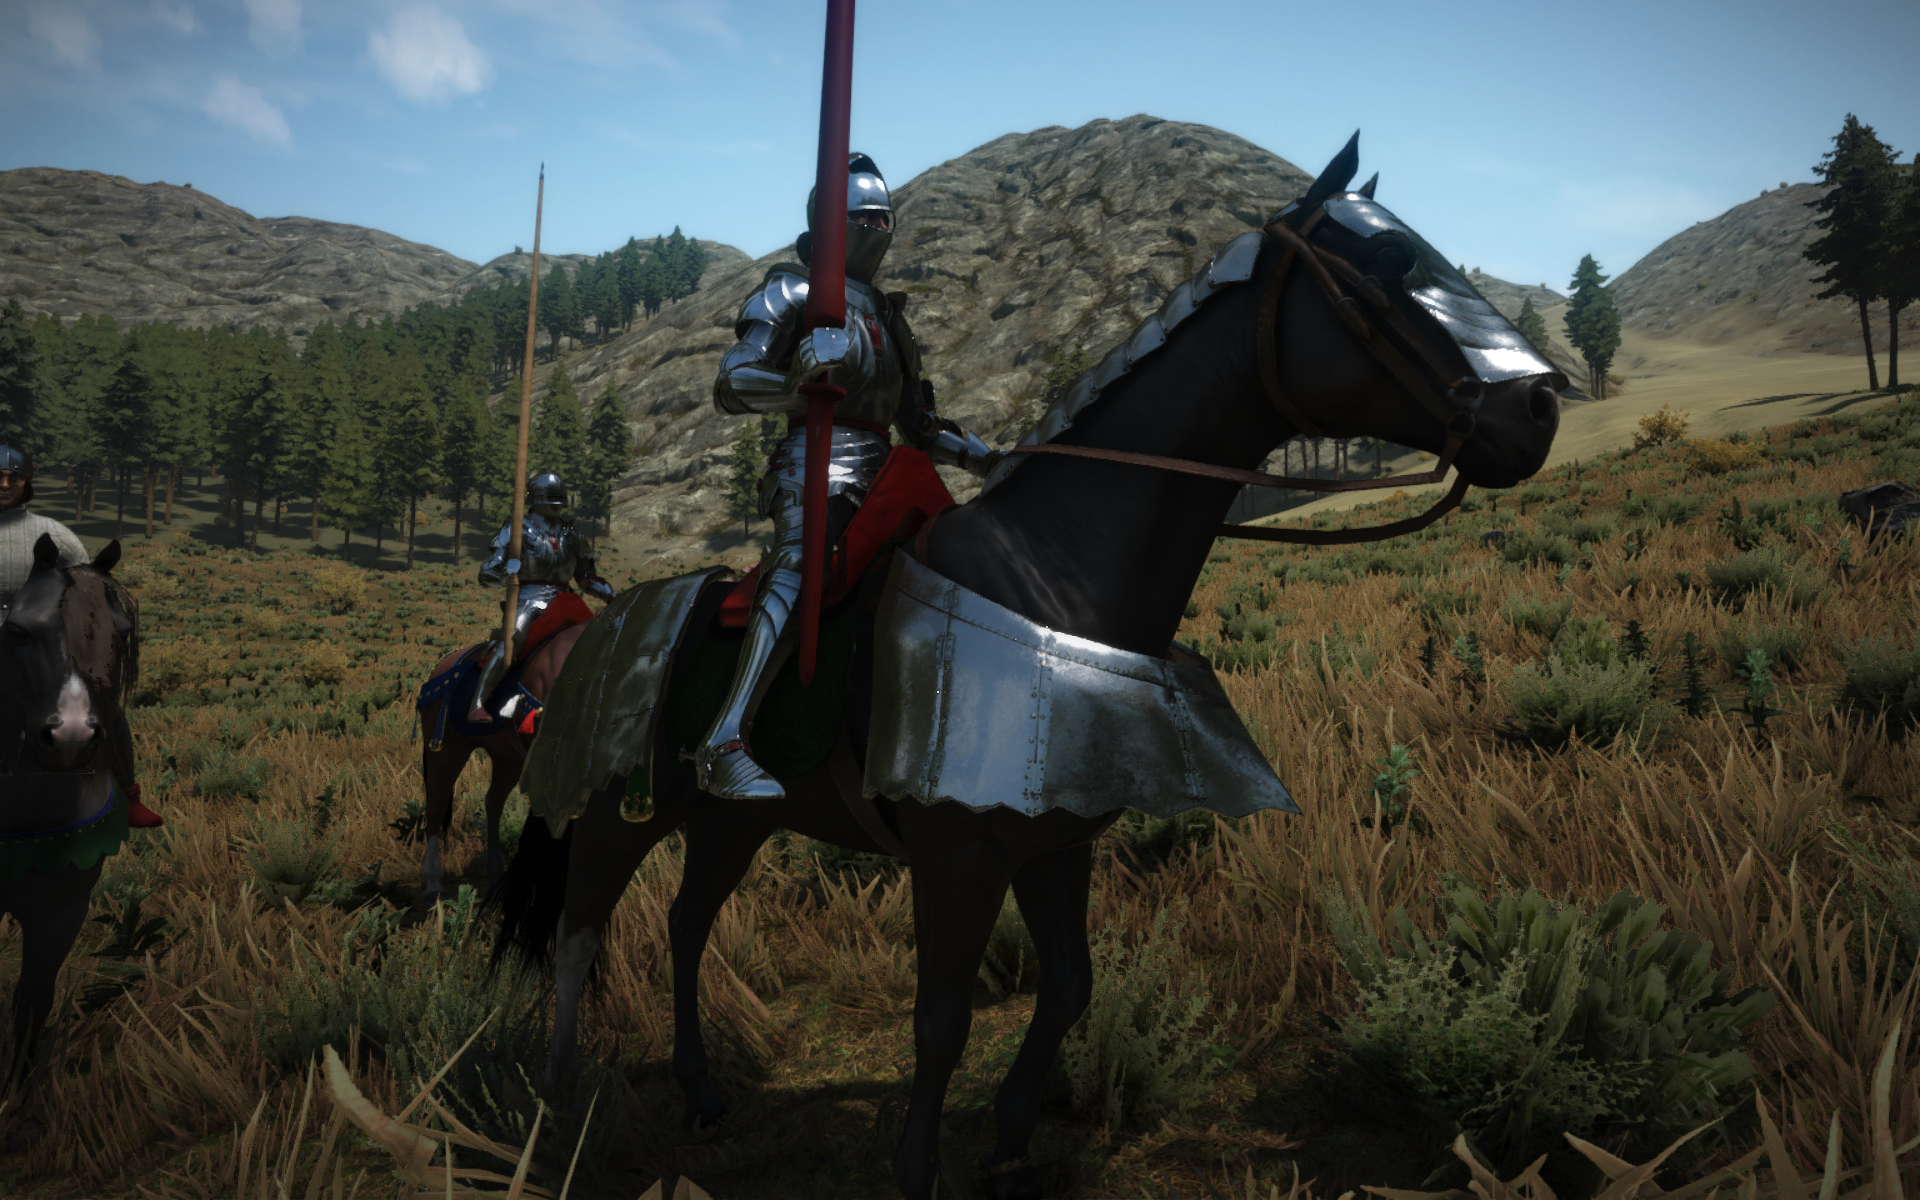 Mount blade 2 bannerlord мод игры престолов. Dell'Arte della Guerra для Mount Blade 2 Bannerlord. Баттанийцы Bannerlord. Mount Blade Европа Россия. Mount and Blade 2 Bannerlord all Weapons.